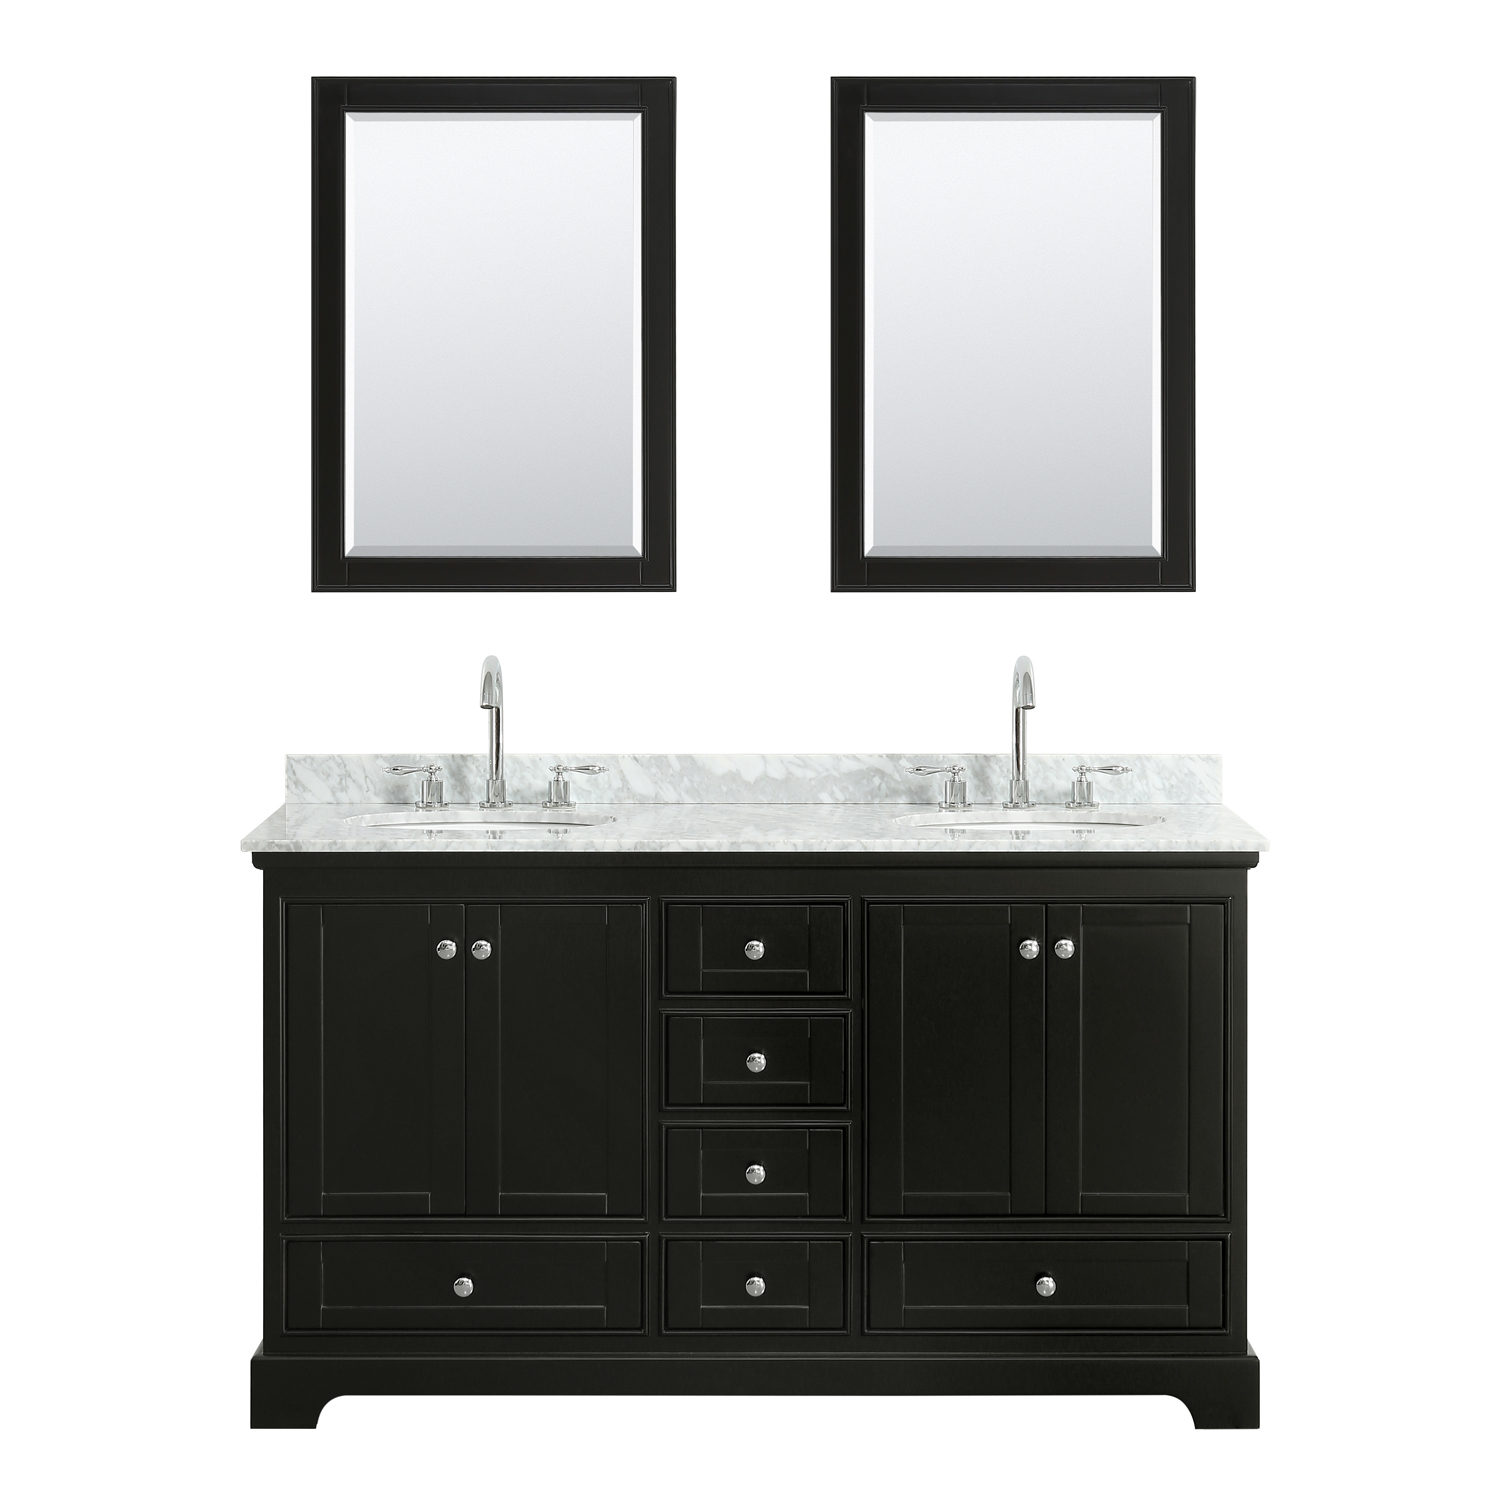 60" Double Bathroom Vanity in White Carrara Marble Countertop with Undermount Porcelain Sinks, Medicine Cabinet, Mirror and Color Options